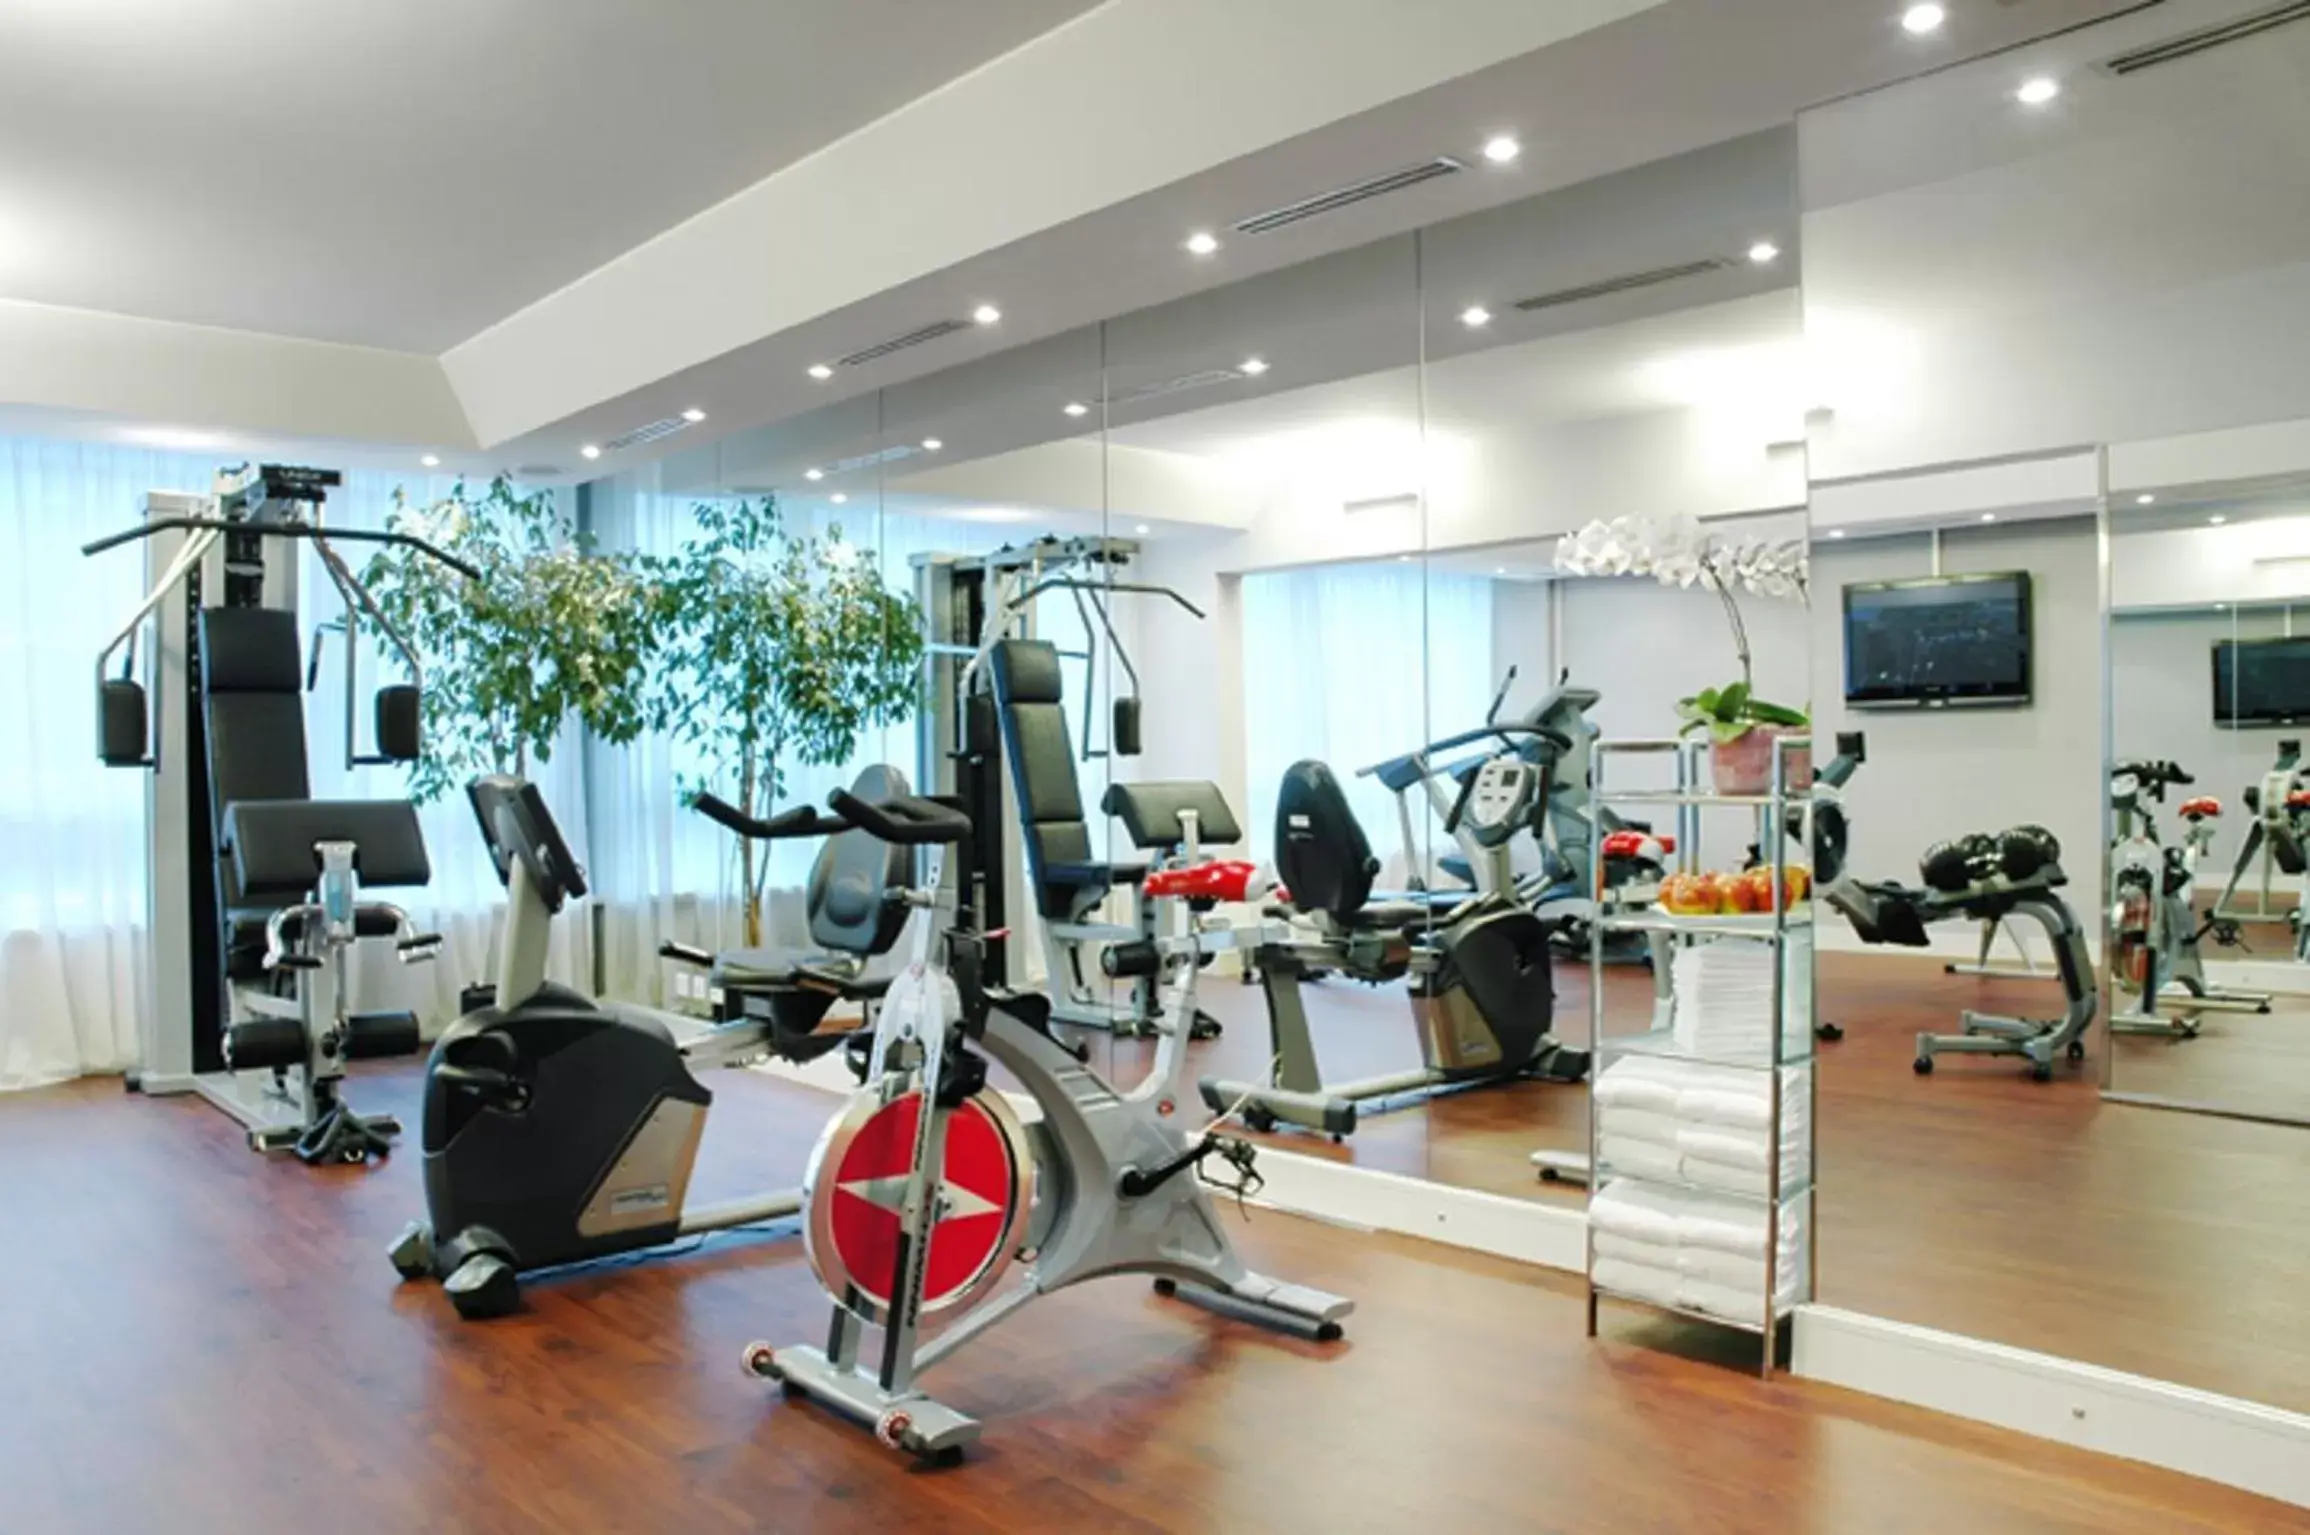 Fitness centre/facilities, Fitness Center/Facilities in Auteuil Manotel